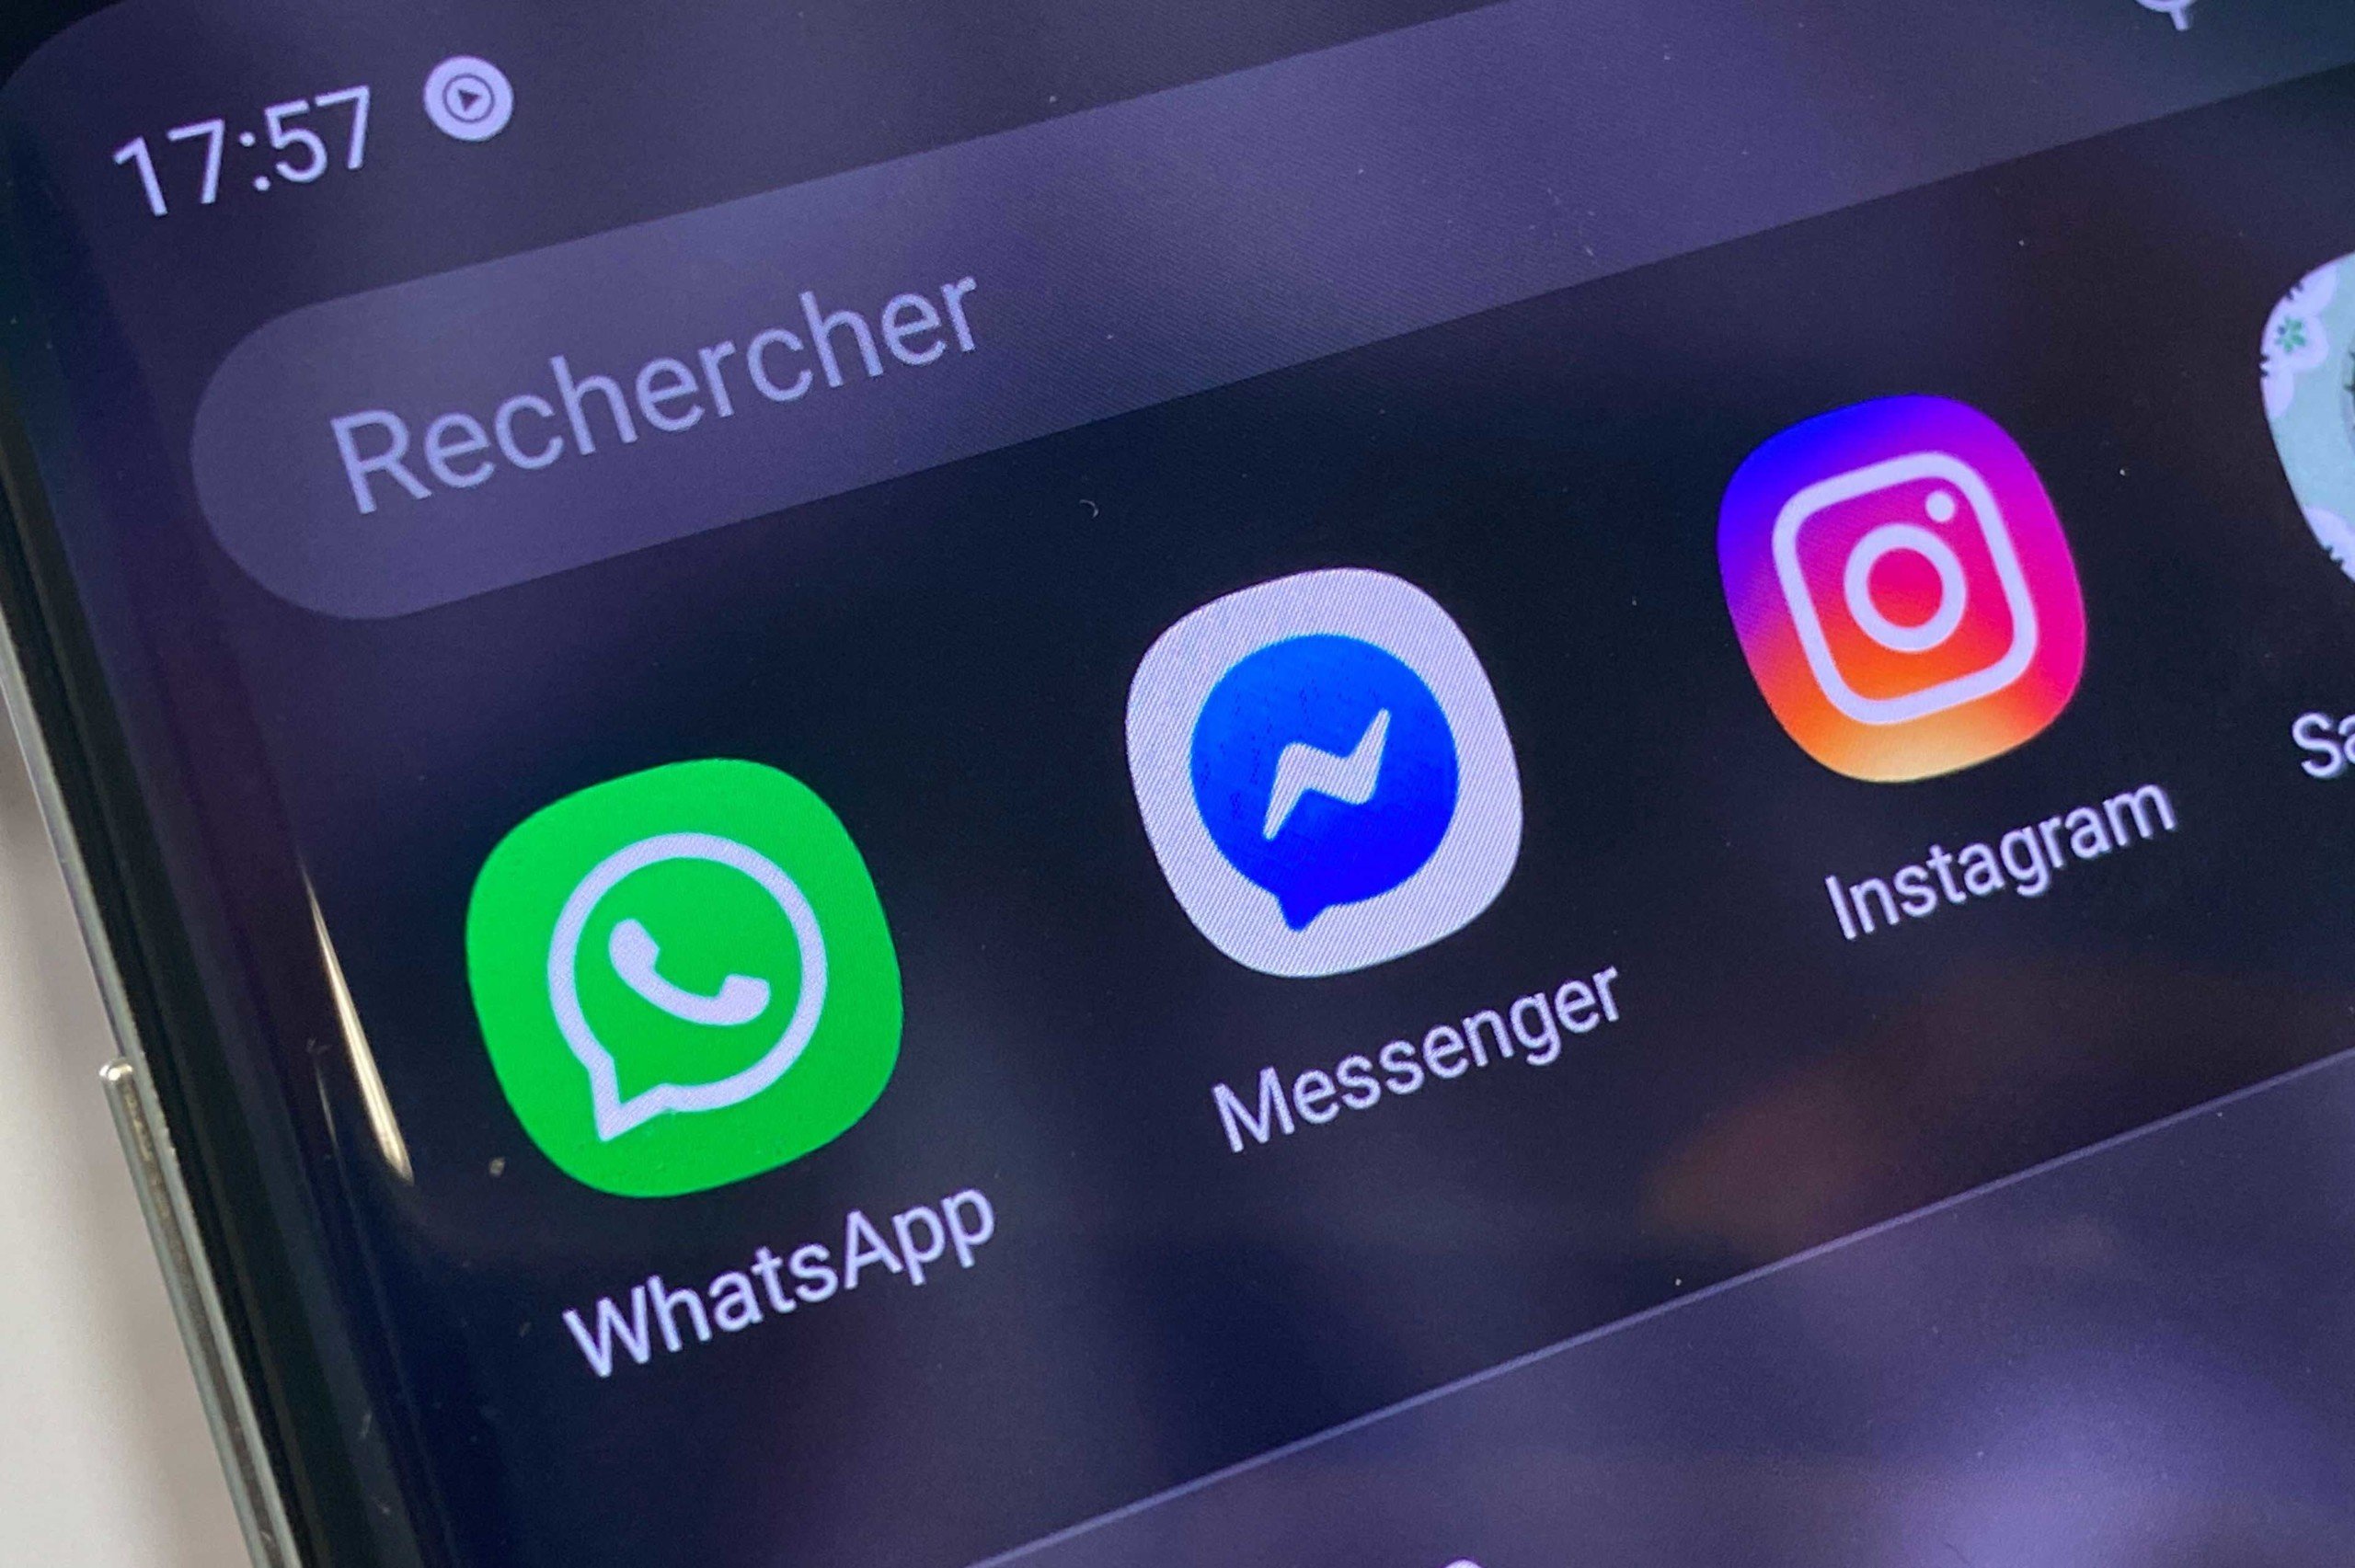 Should you terminate WhatsApp messages to protect your privacy?